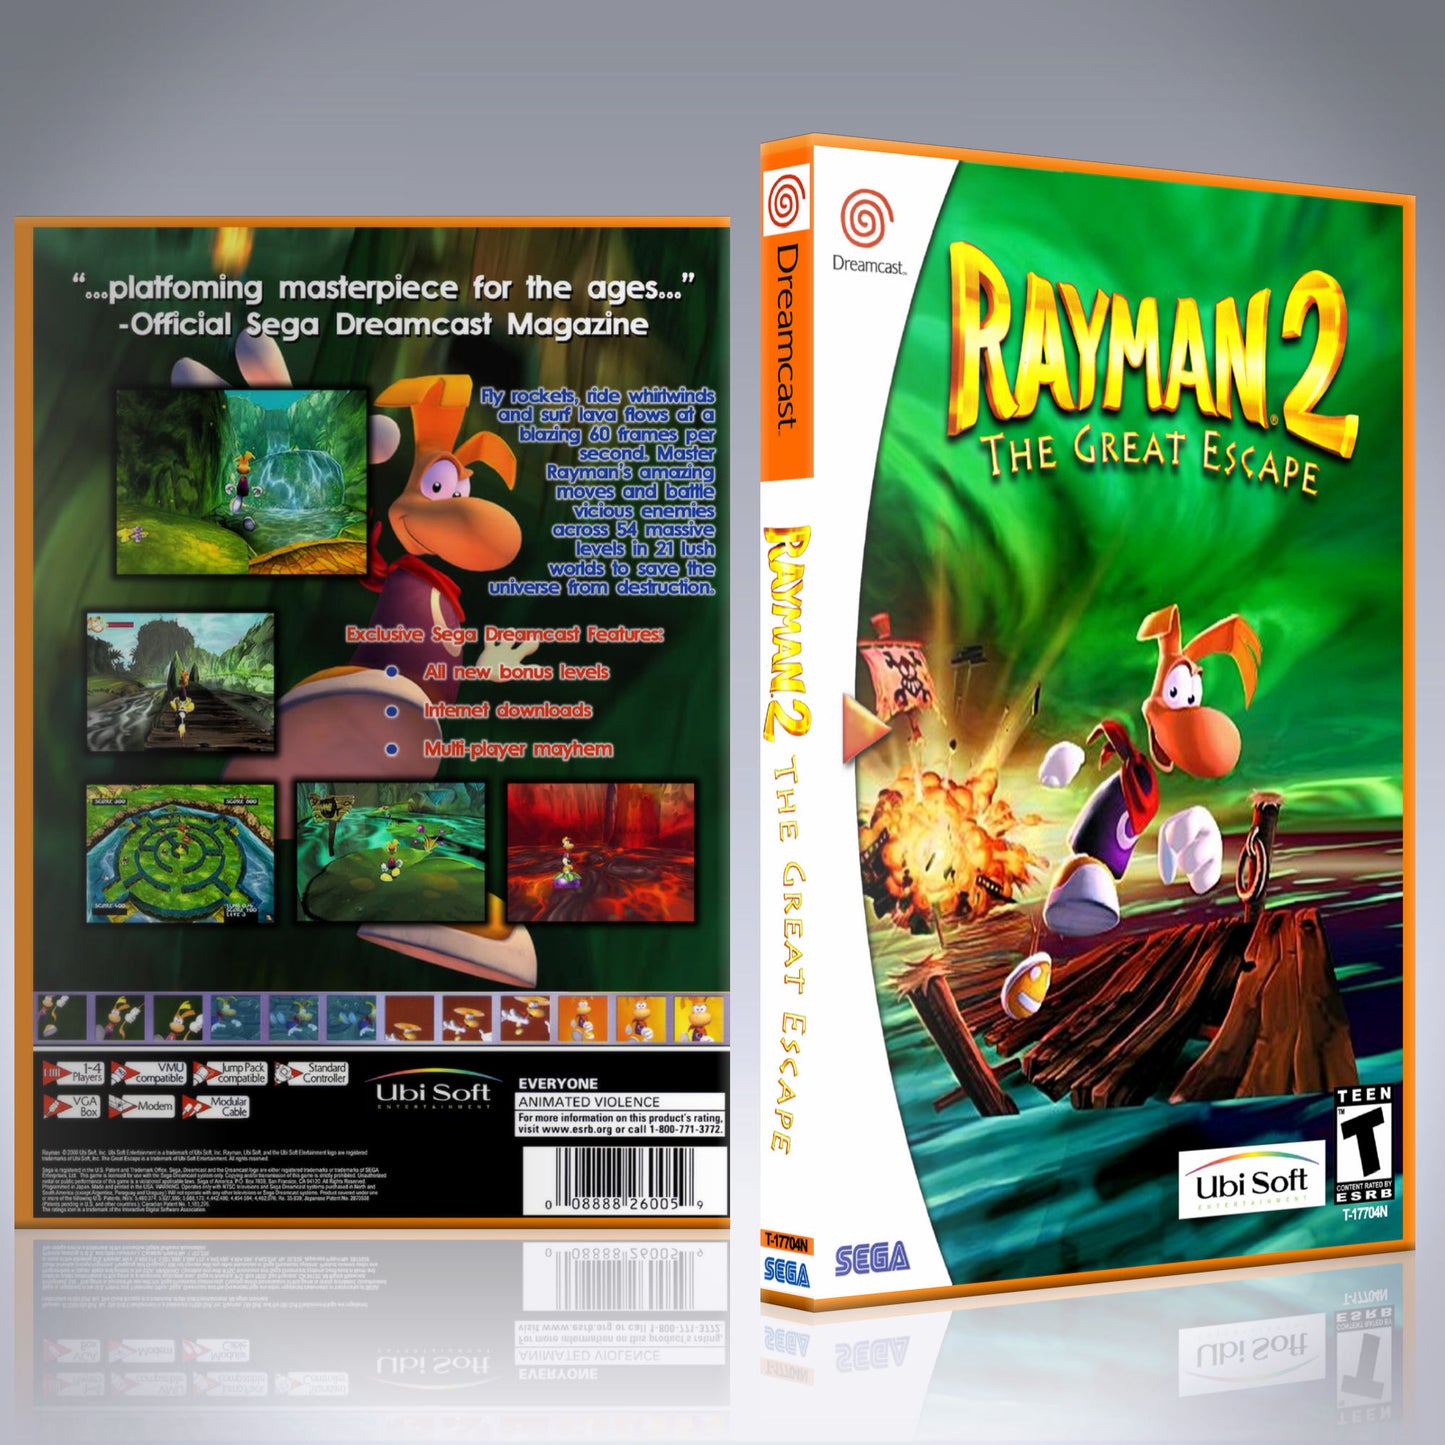 Dreamcast Custom Case - NO GAME - Rayman 2 - The Great Escape